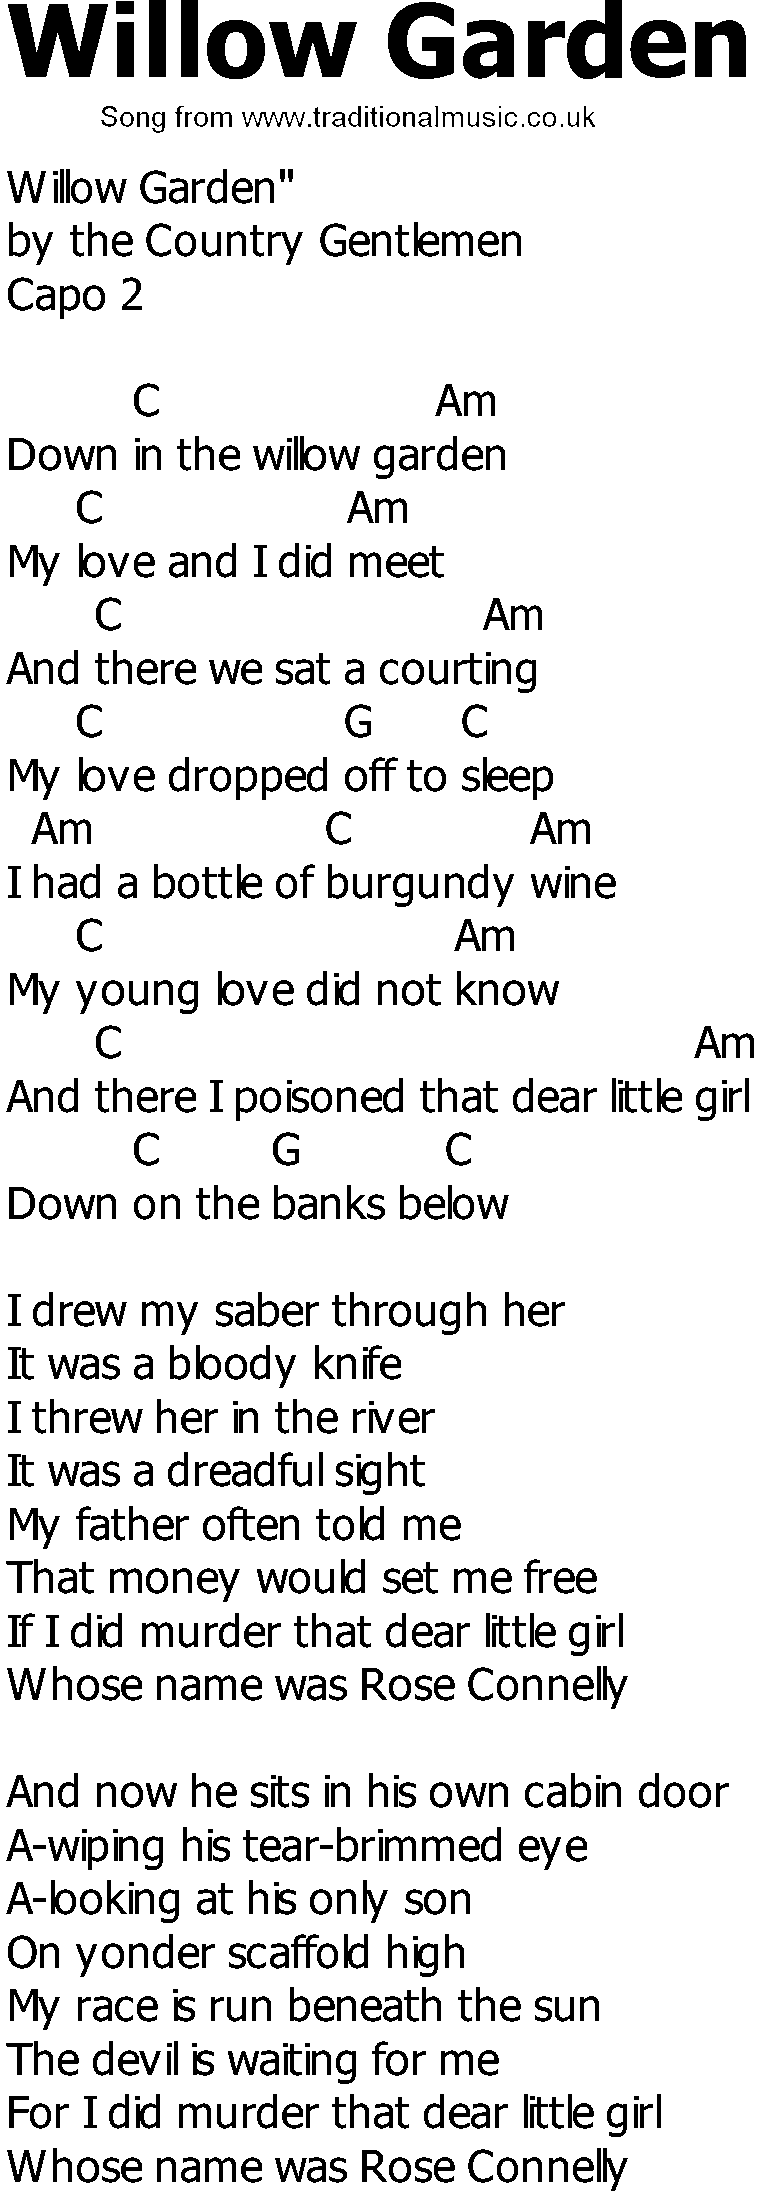 Old Country song lyrics with chords - Willow Garden